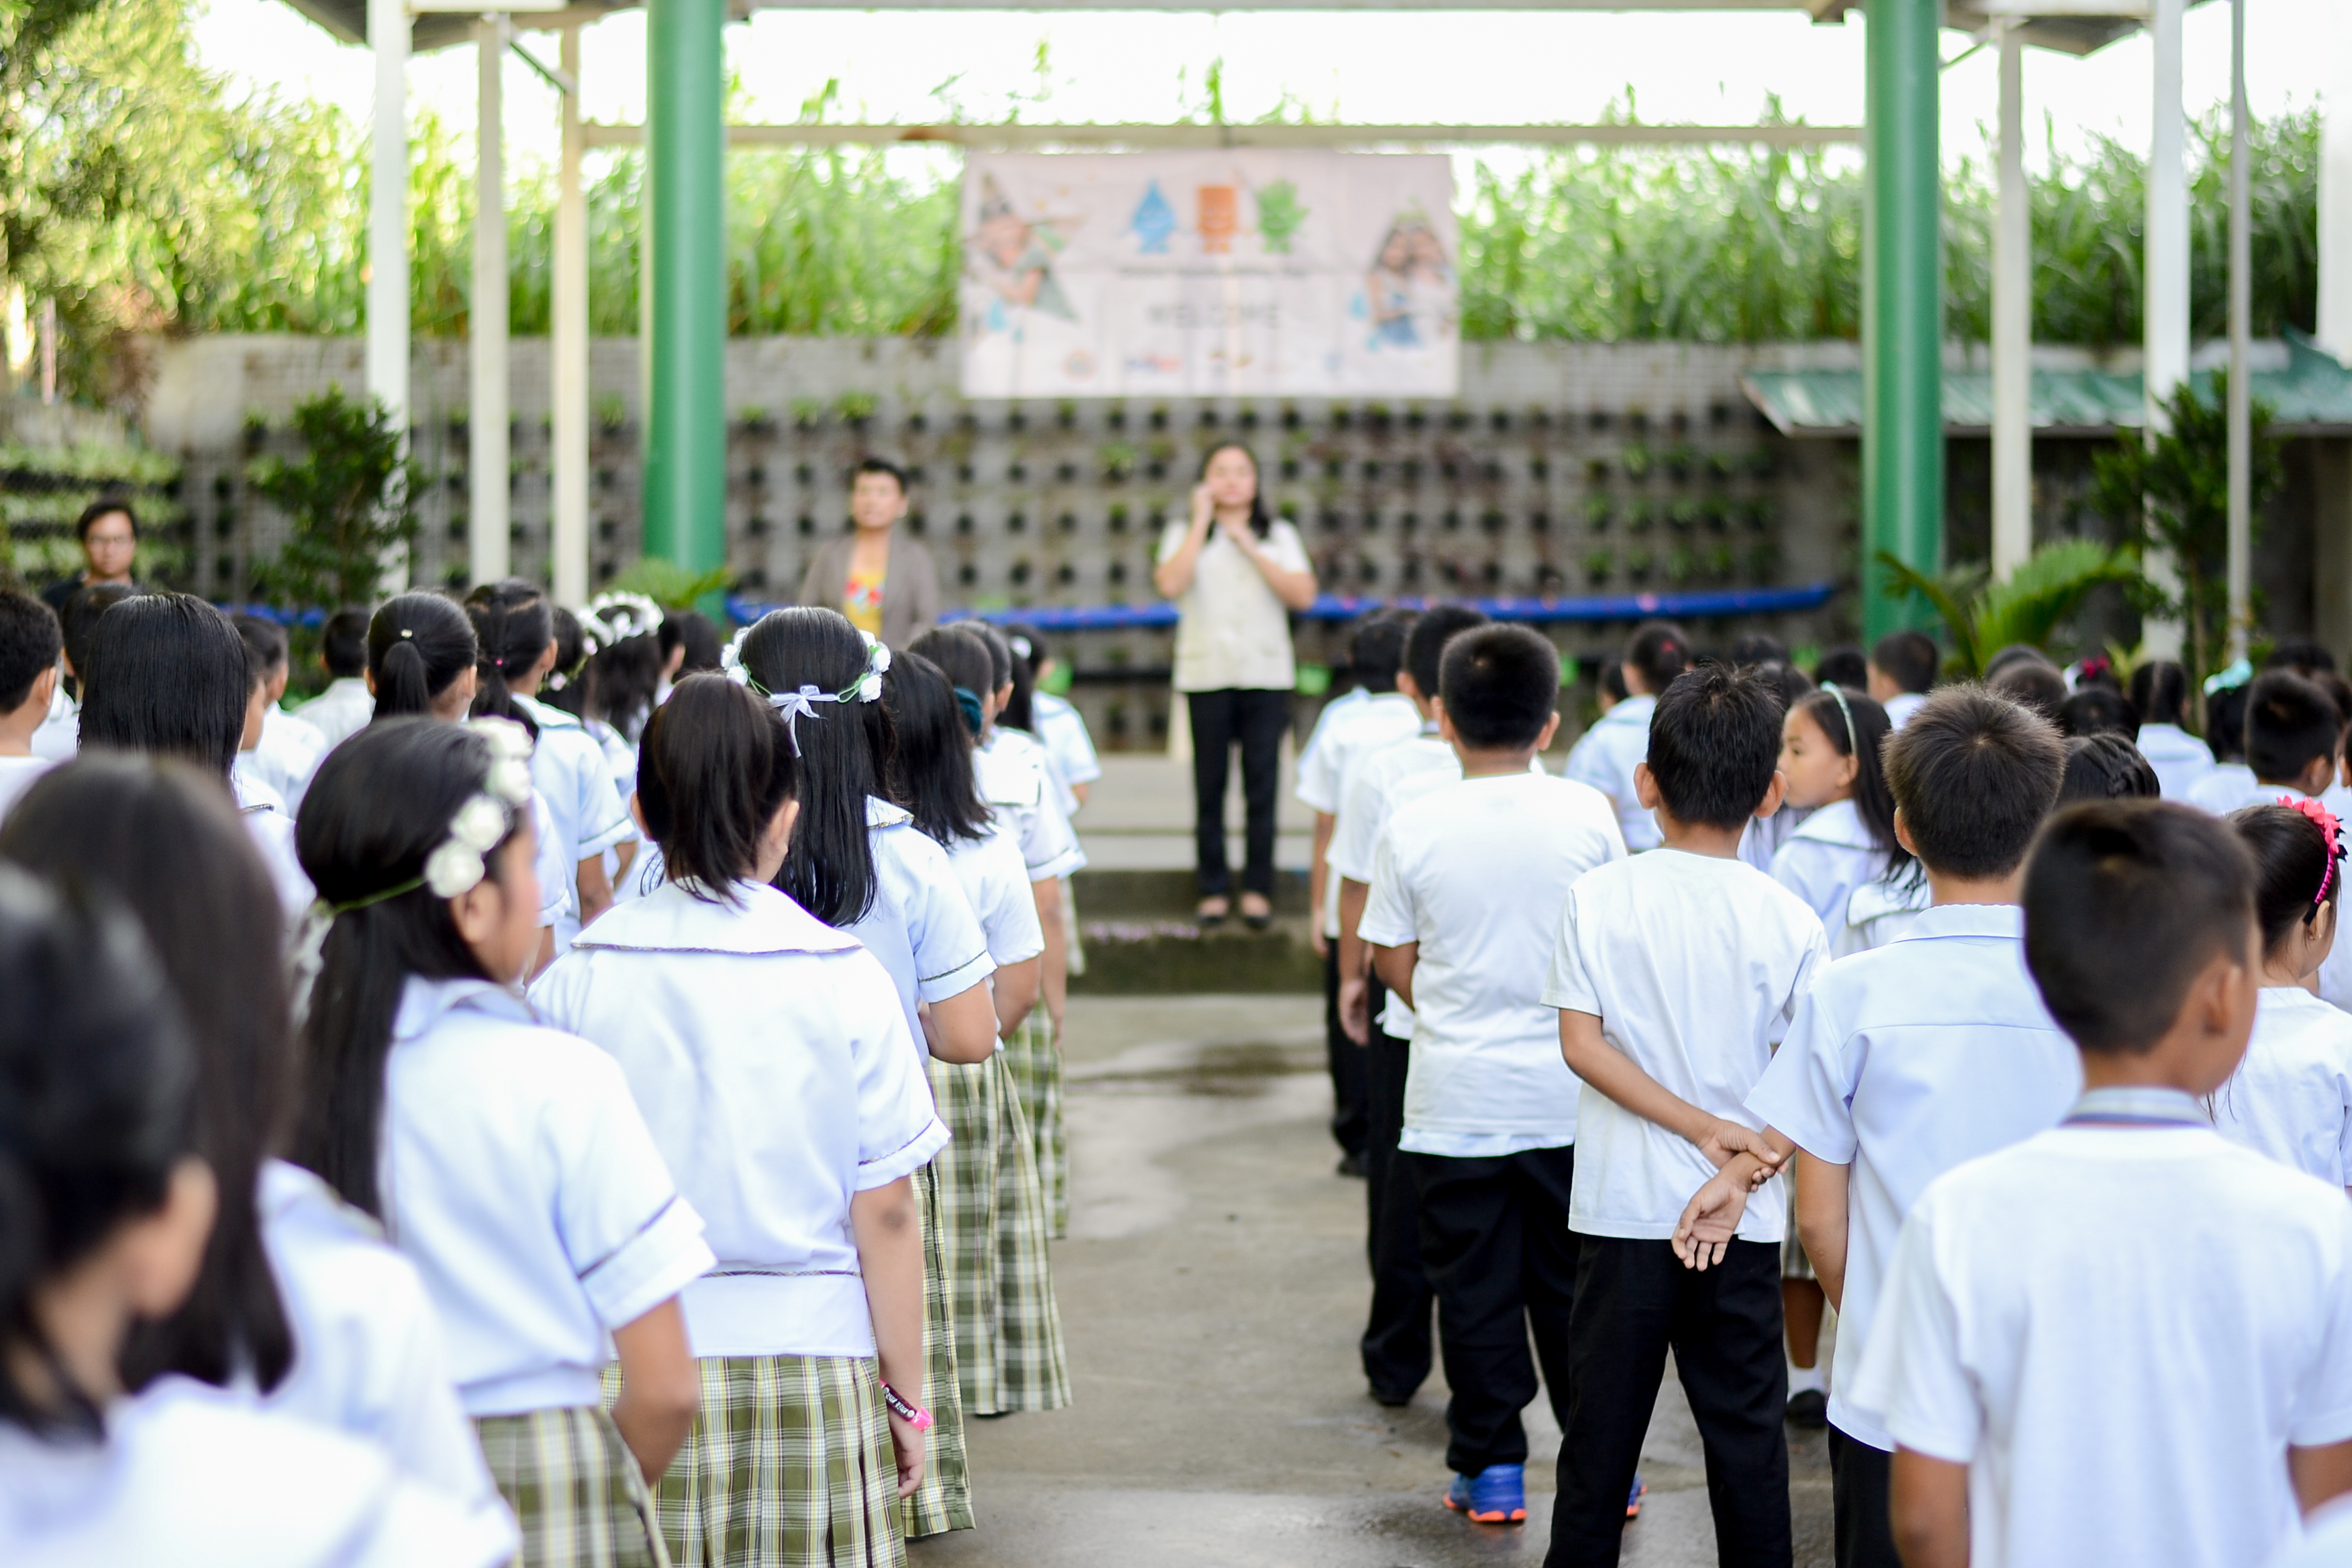 Hygiene lesson in a school as part of the GIZ programme "Fit for School" in Southeast Asia